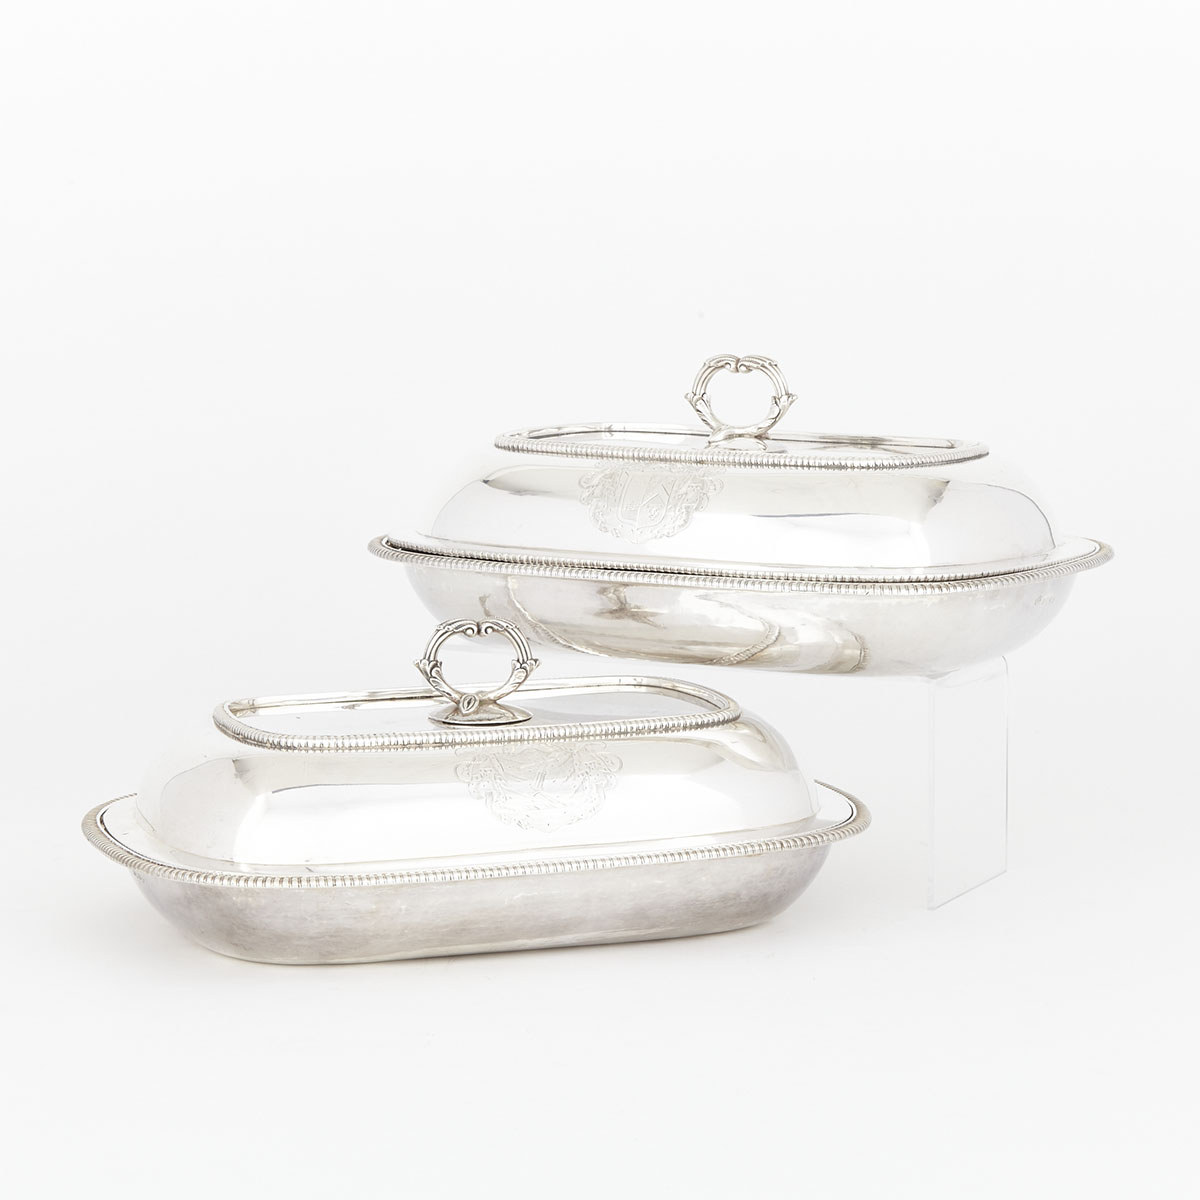 Pair of George III Silver Covered Entrée Dishes, Richard Cook, London, 1805